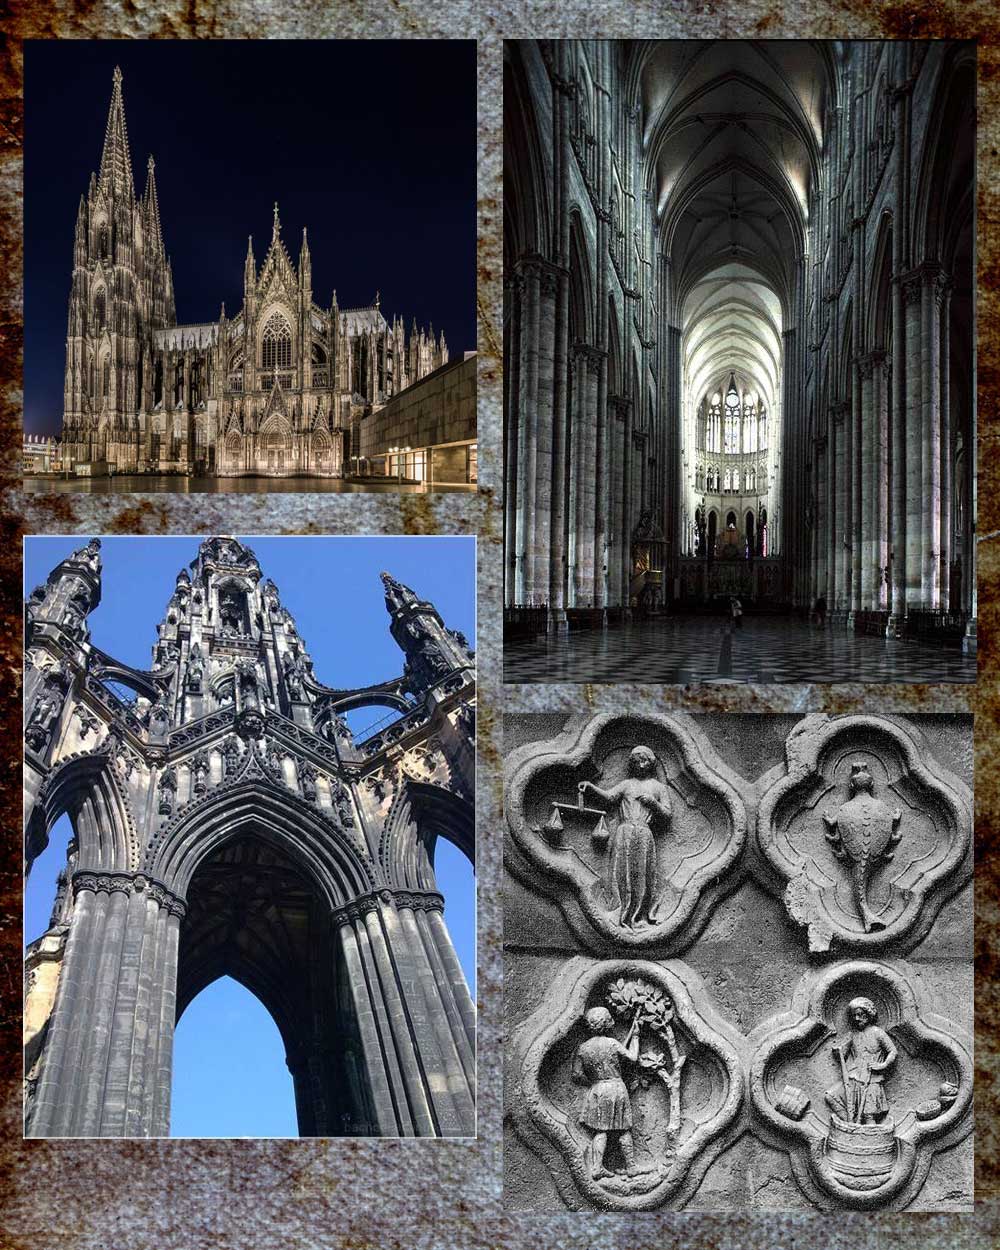 gothic architecture in the 12th century